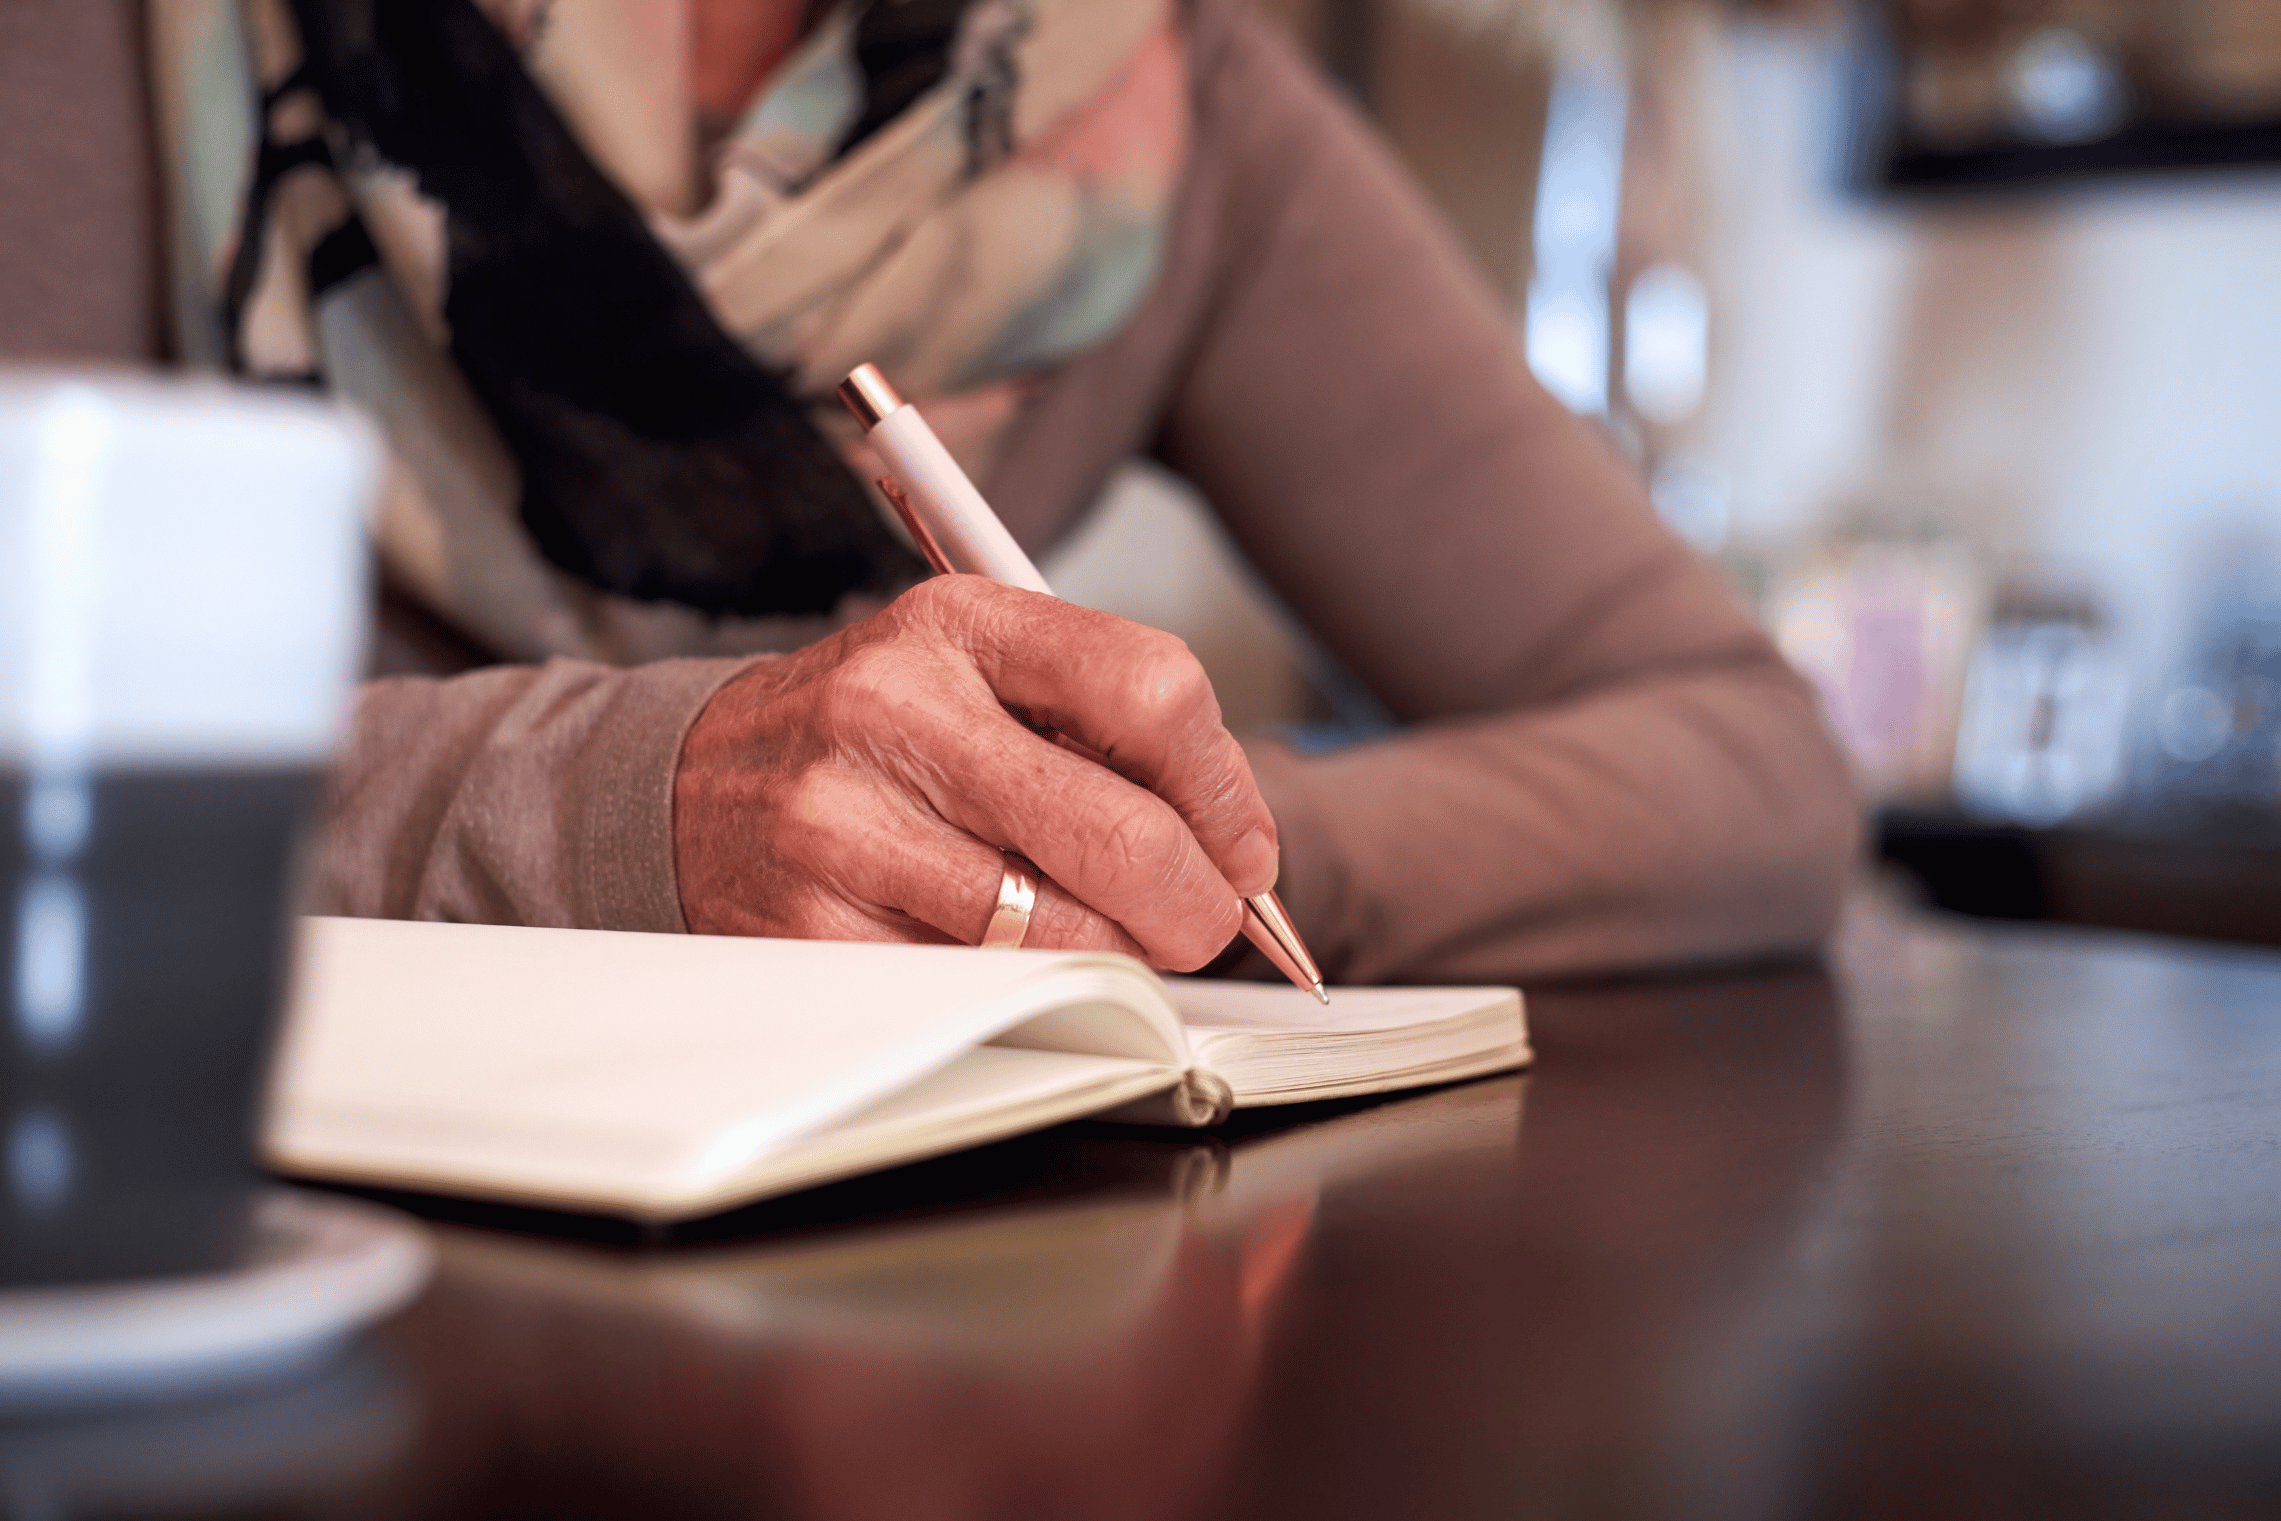 An image of a woman journaling